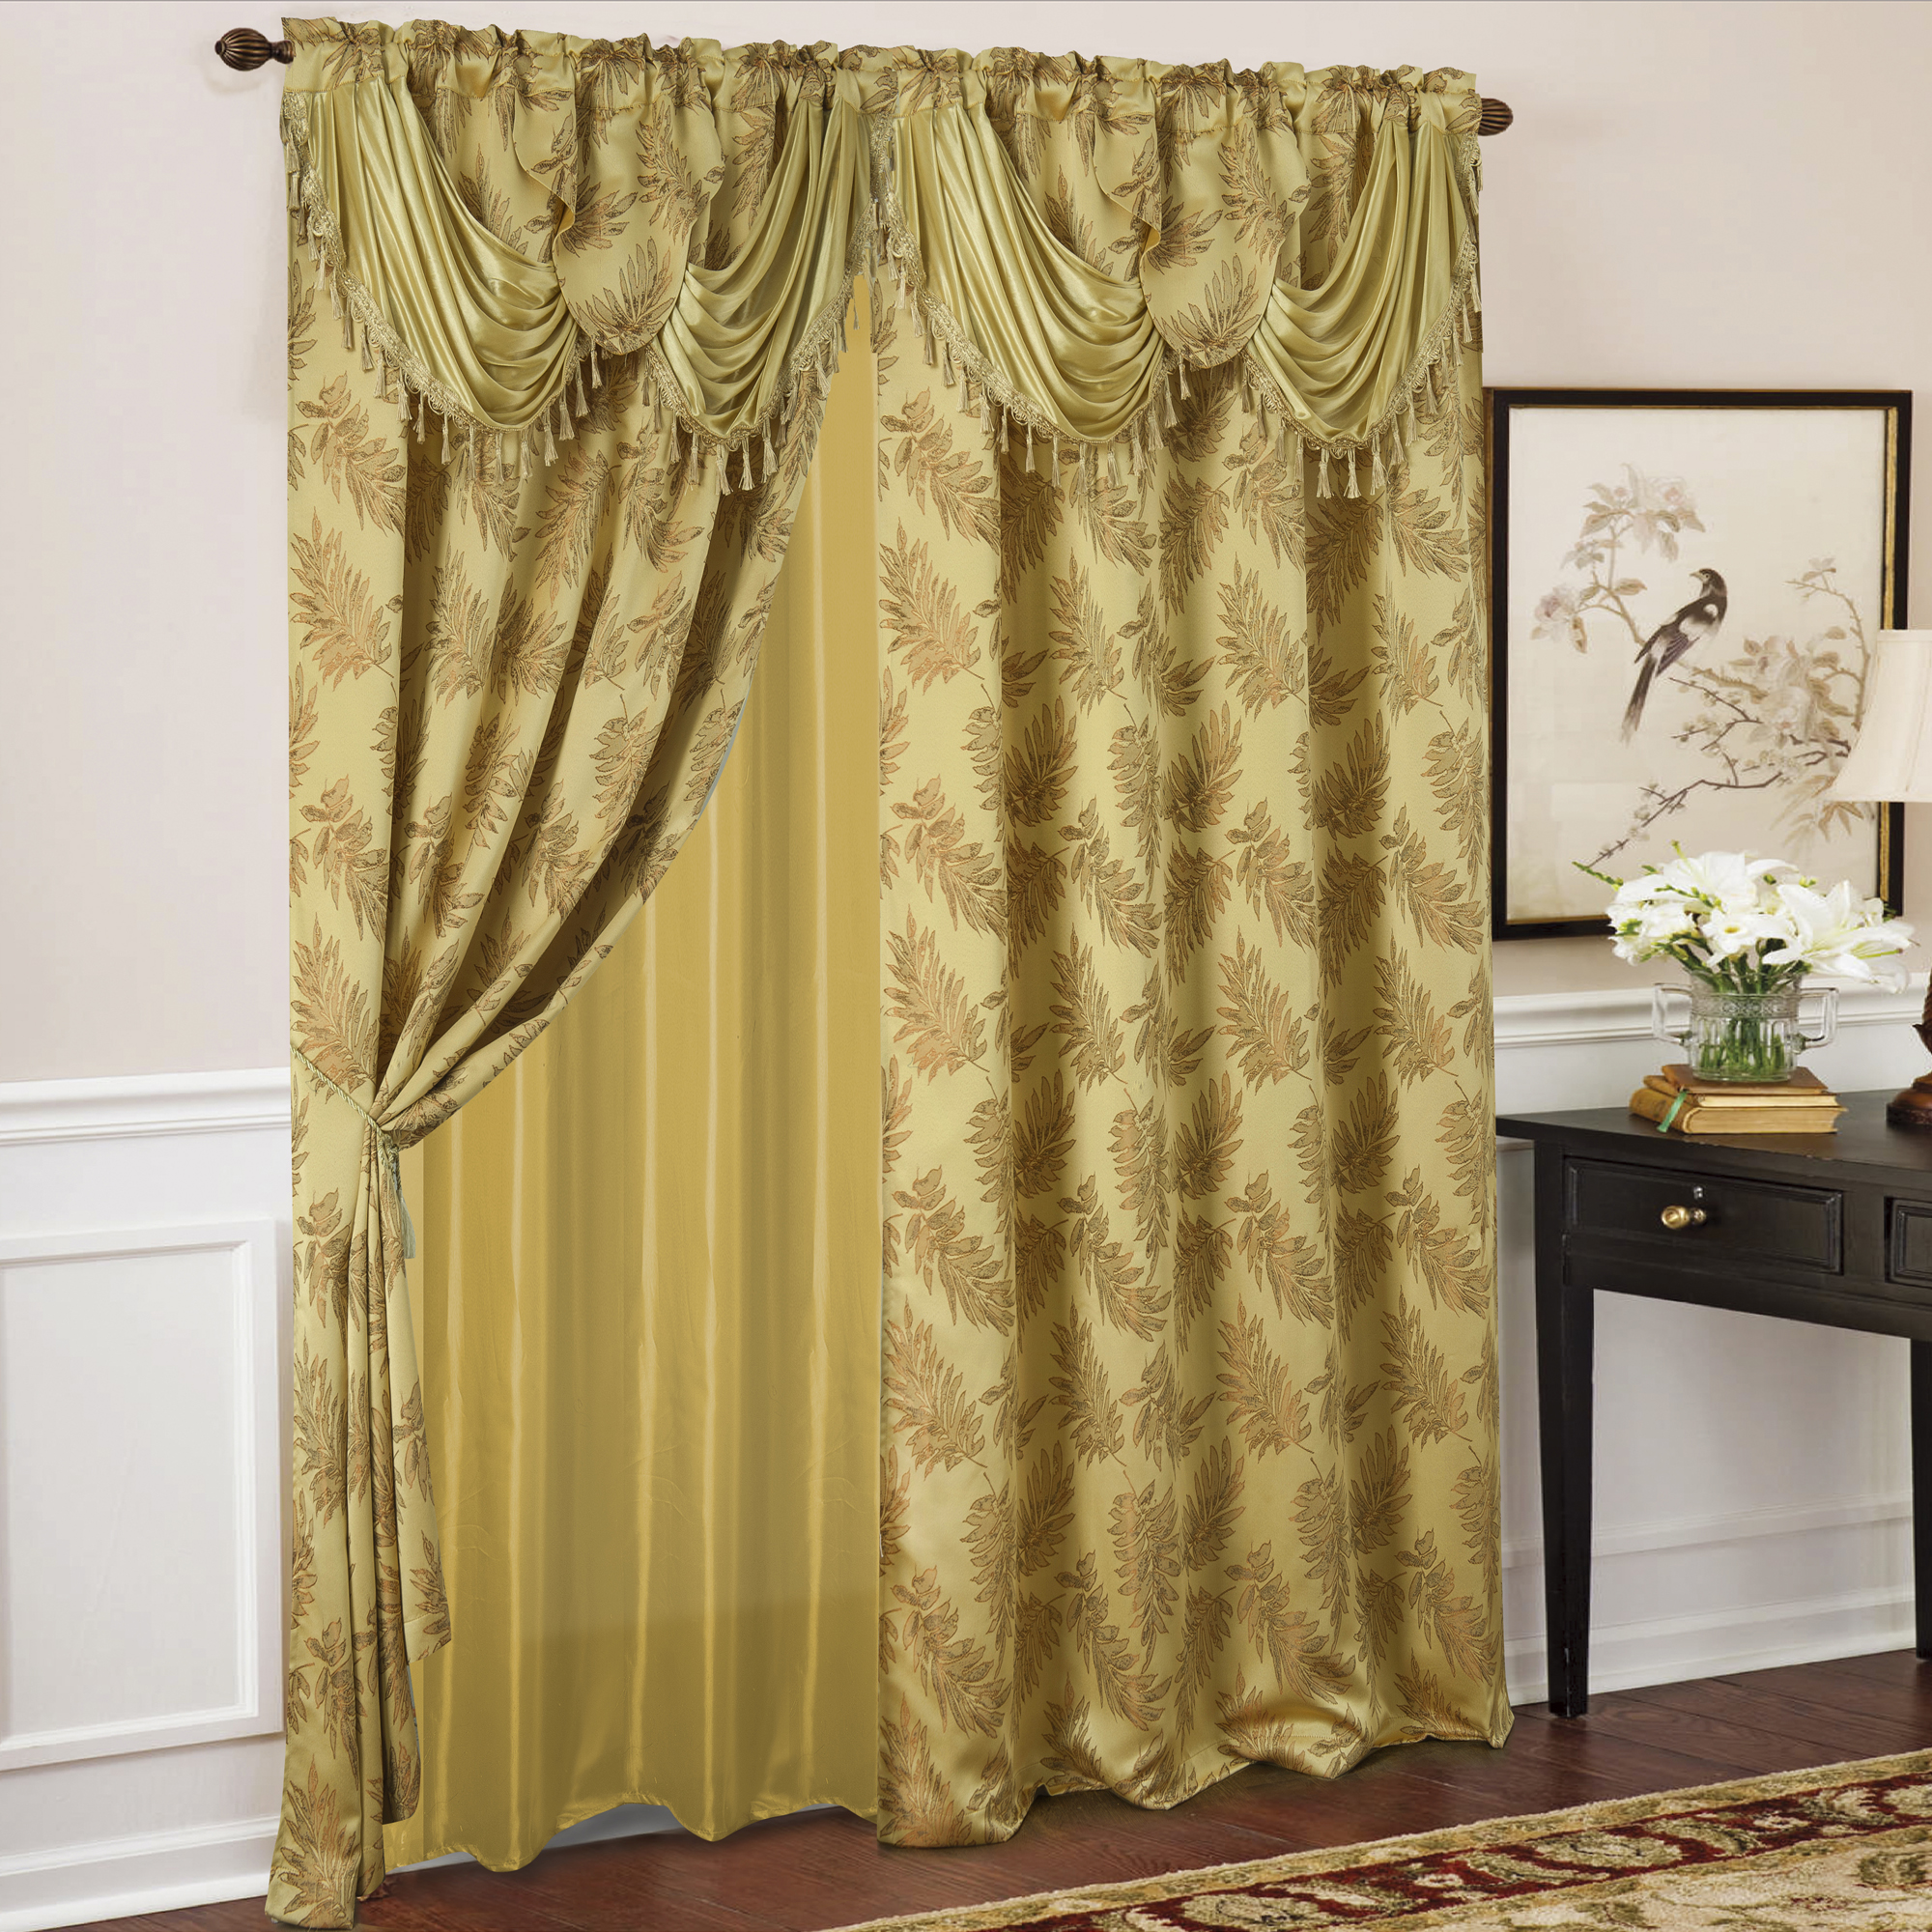 Olivia Gray Palm Floral Textured Jacquard 54 x 84 in. Single Rod Pocket Curtain Panel w/ Attached 18 in. Valance in Gold